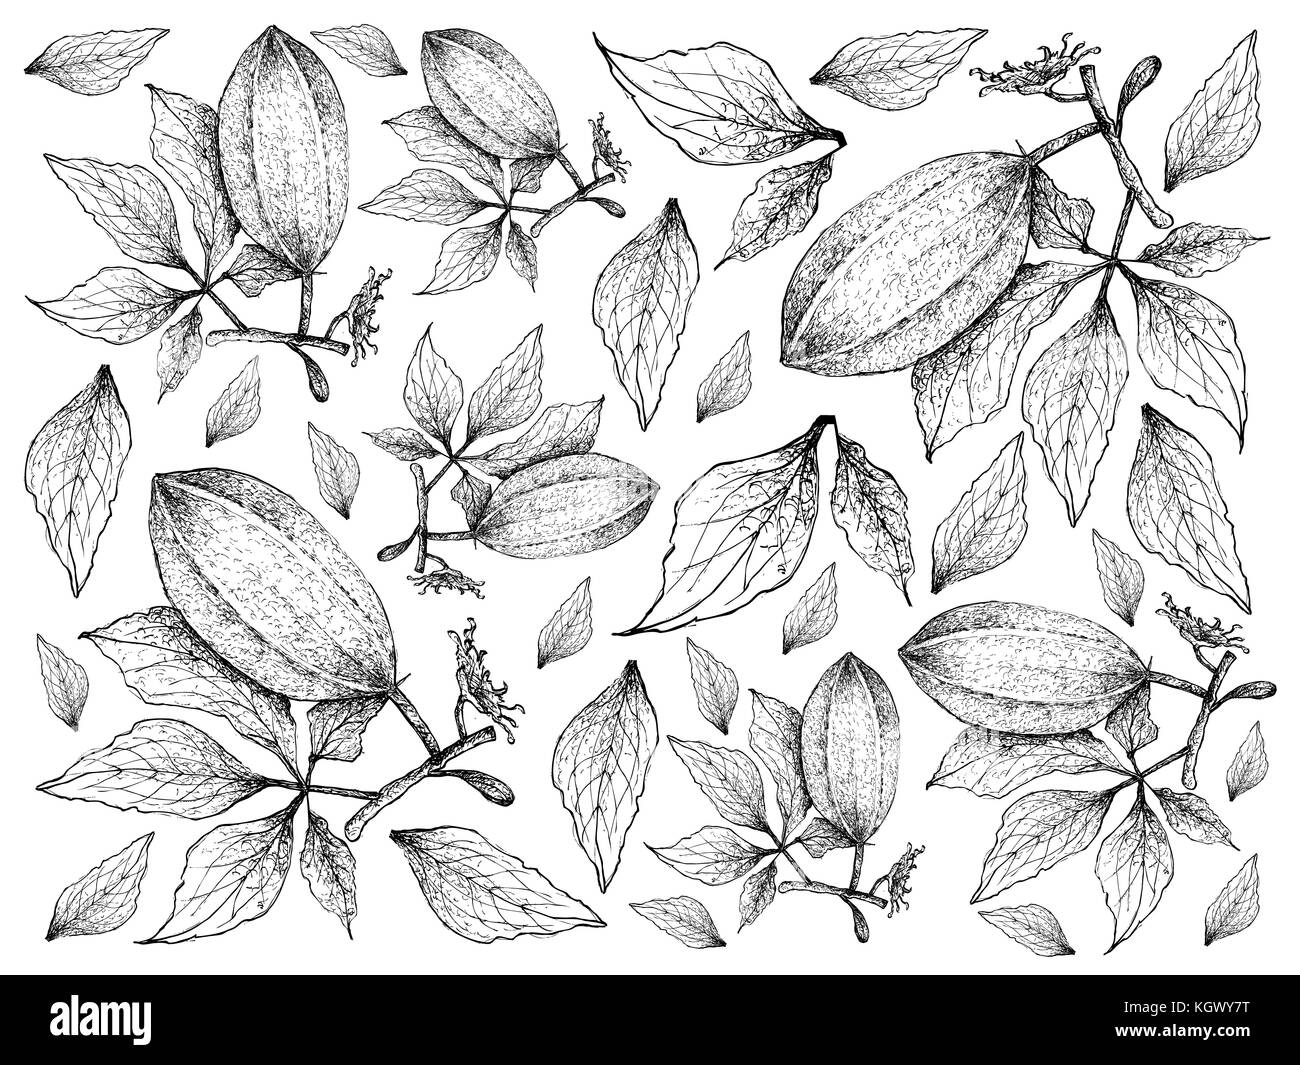 Vegetable Salad, Illustration Background Pattern of Hand Drawn Sketch Delicious Fresh Green Fluted Pumpkin Plants Isolated on White Background. Stock Photo